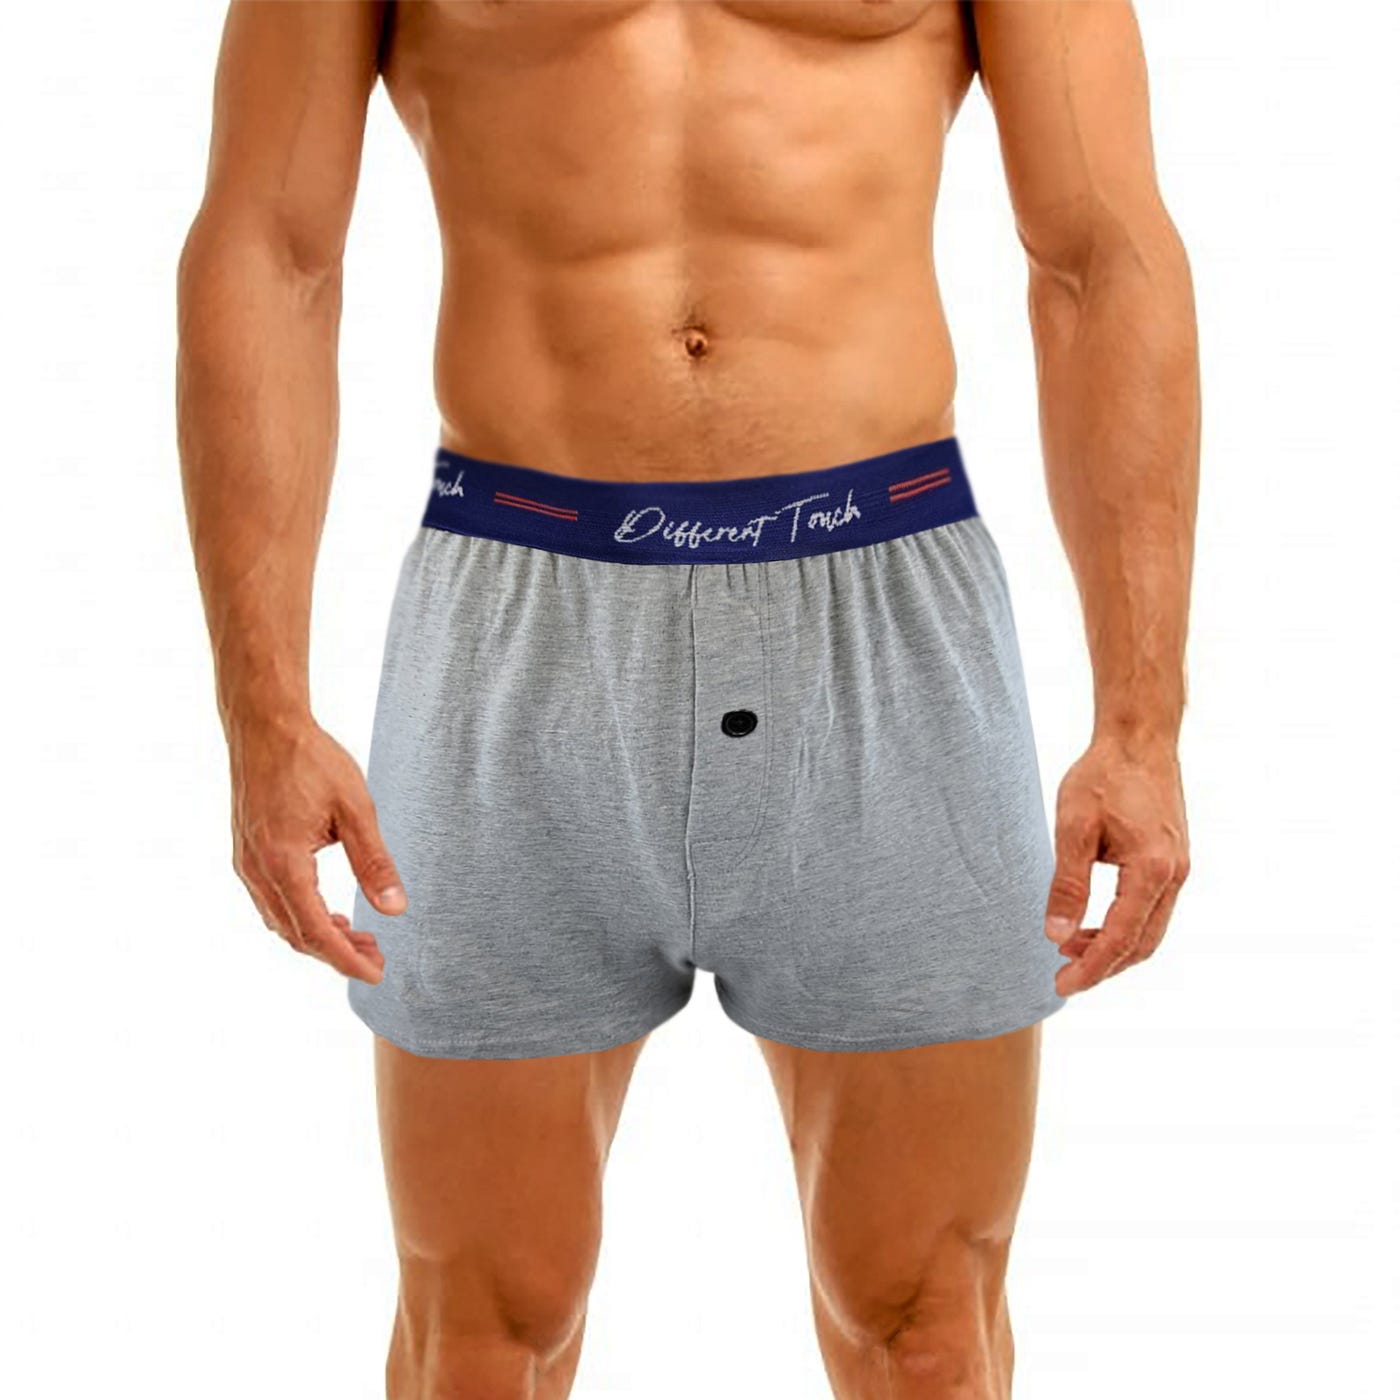 How to wear the support briefs? 